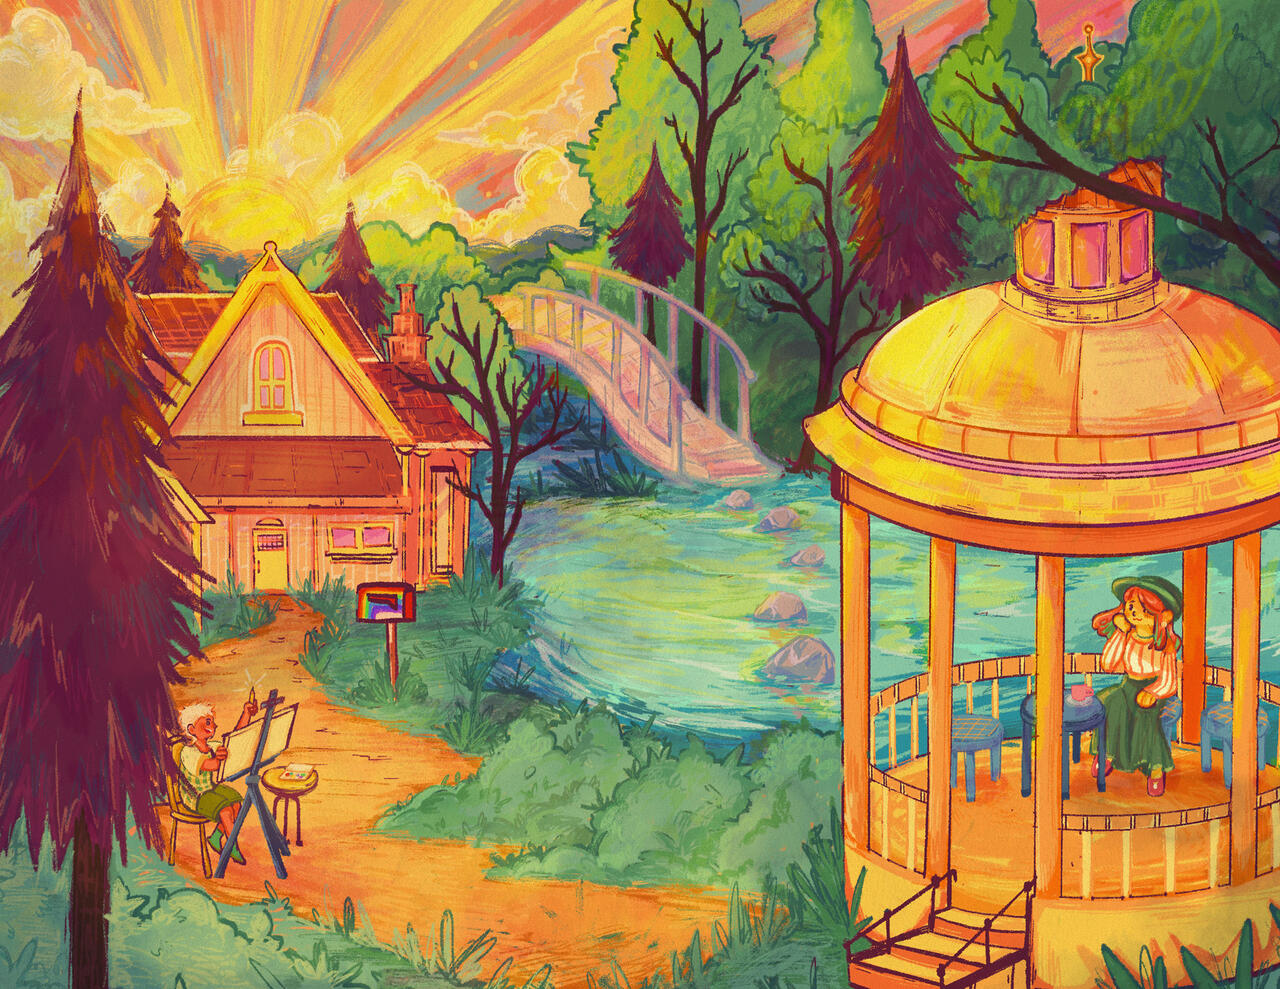 A Cottage Dream illustration by Ngan Huynh